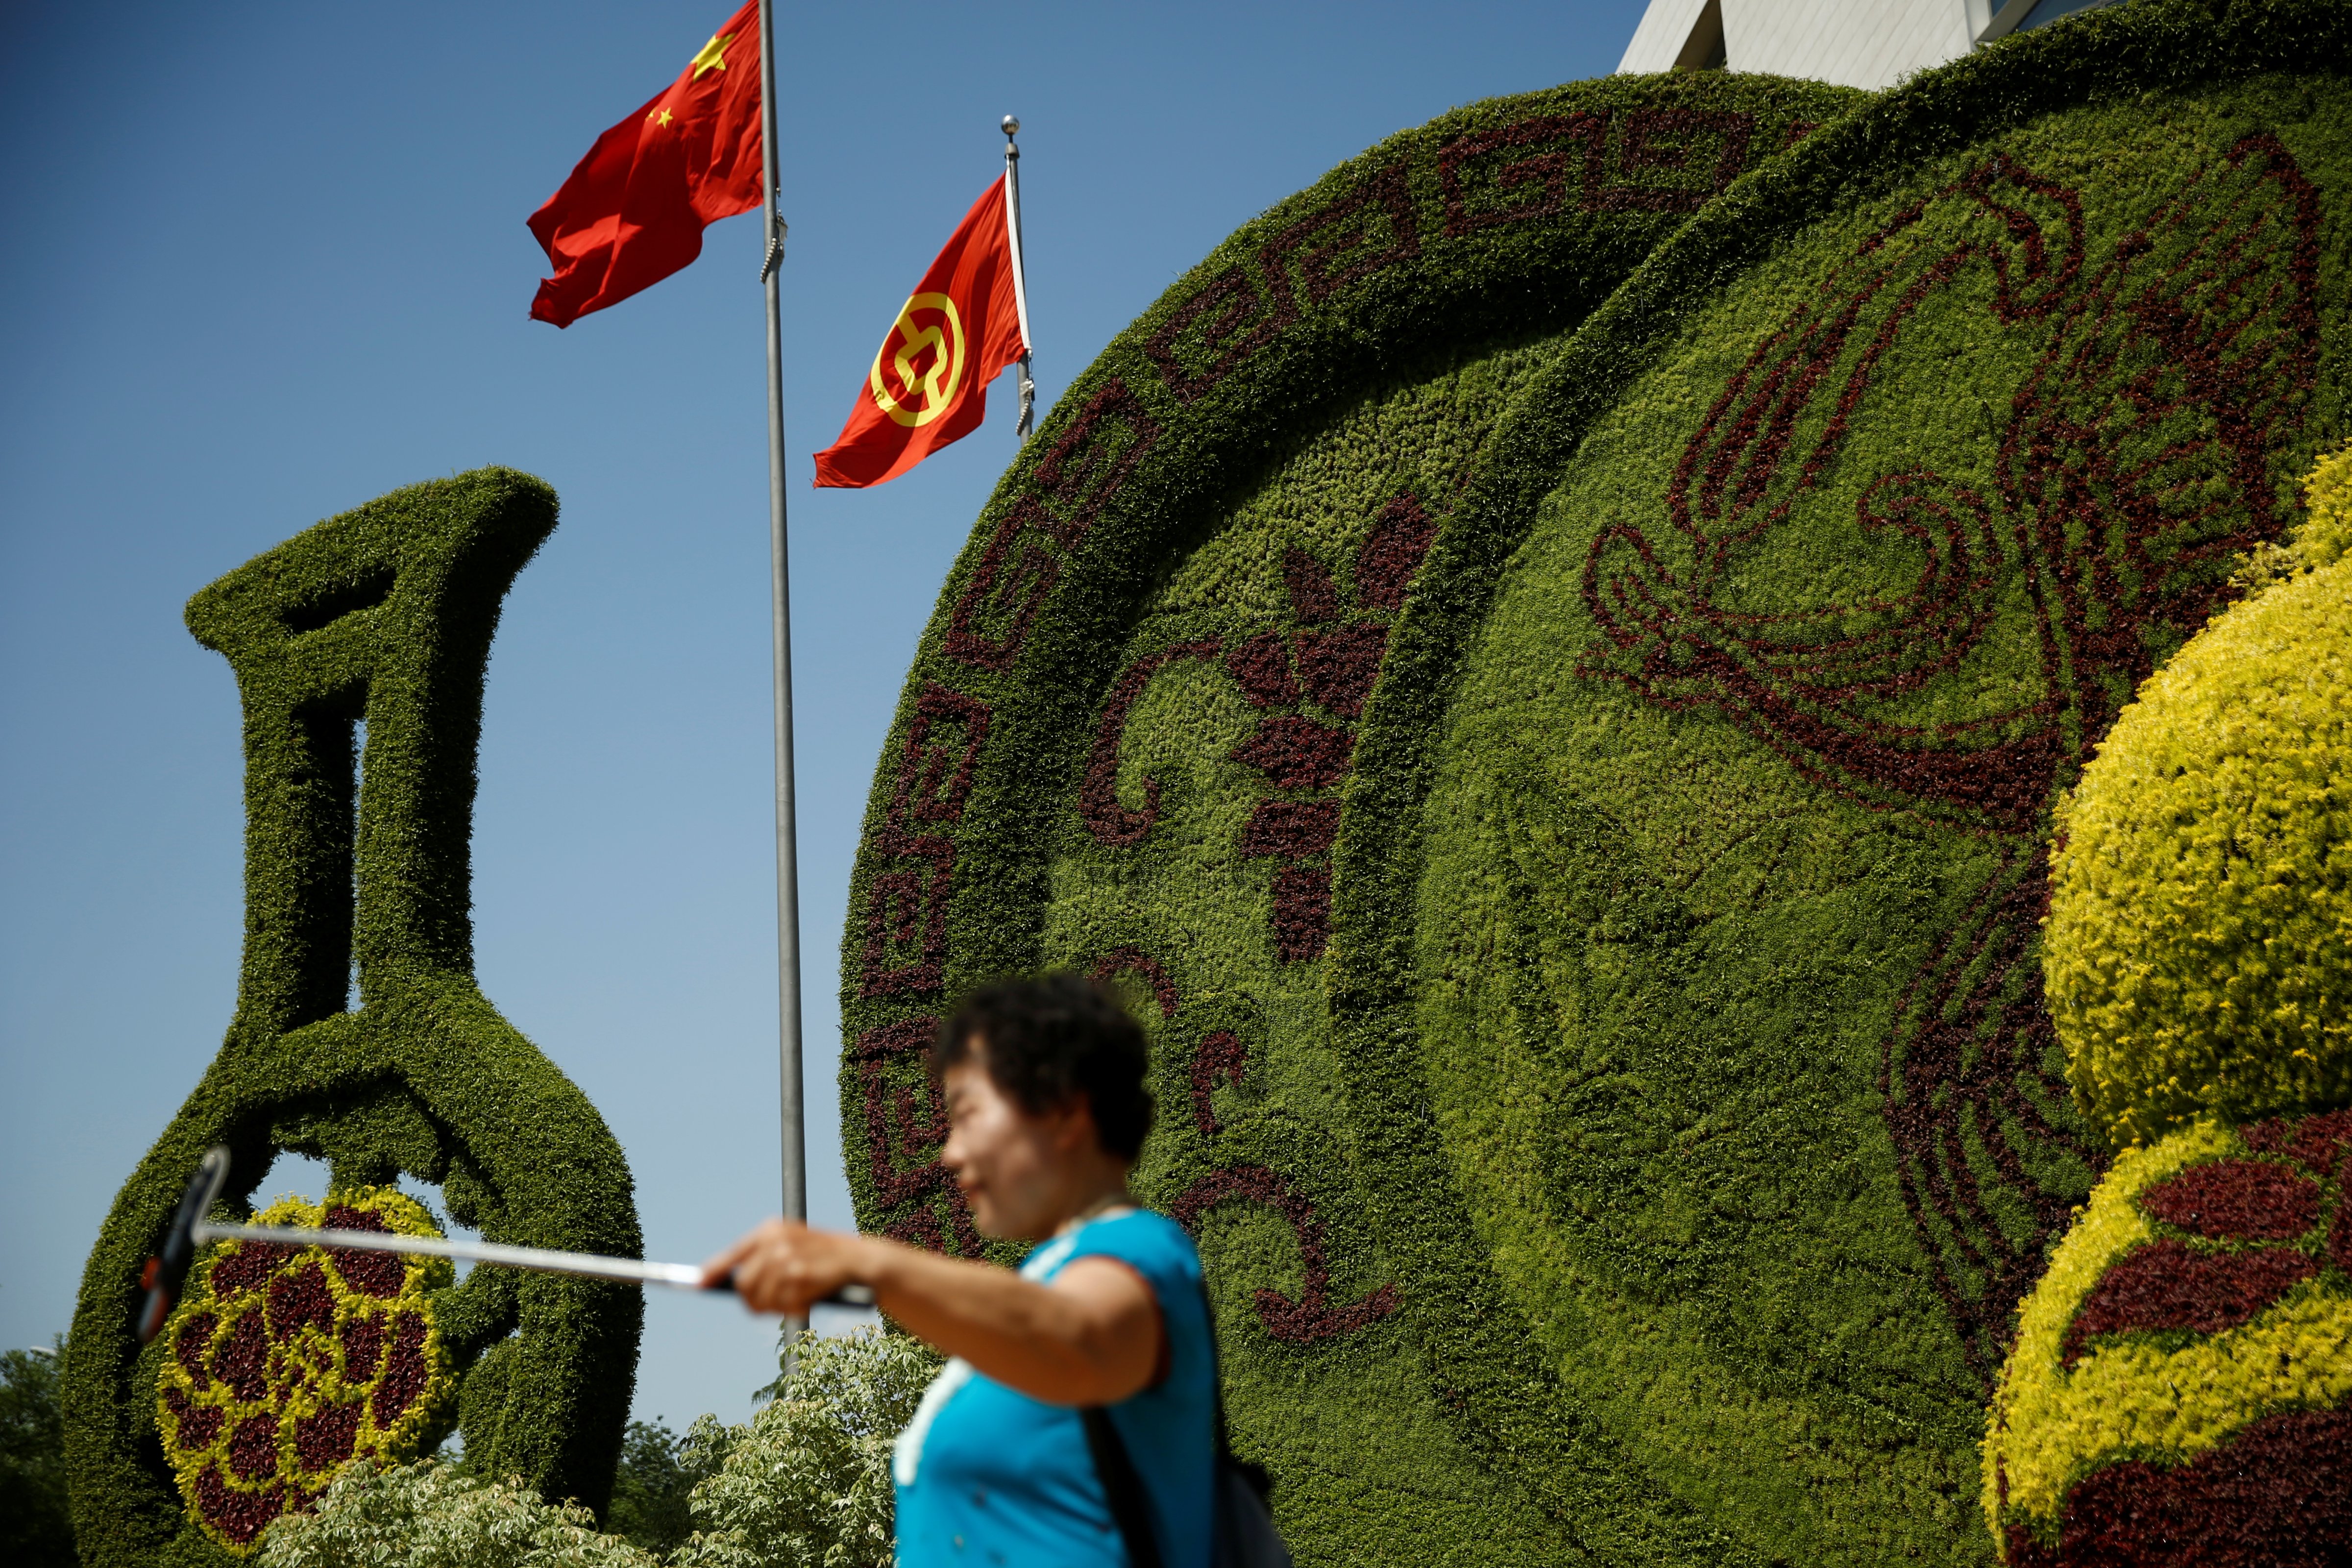 A woman takes pictures in front of a flower display set up ahead of the Belt and Road Forum in central Beijing